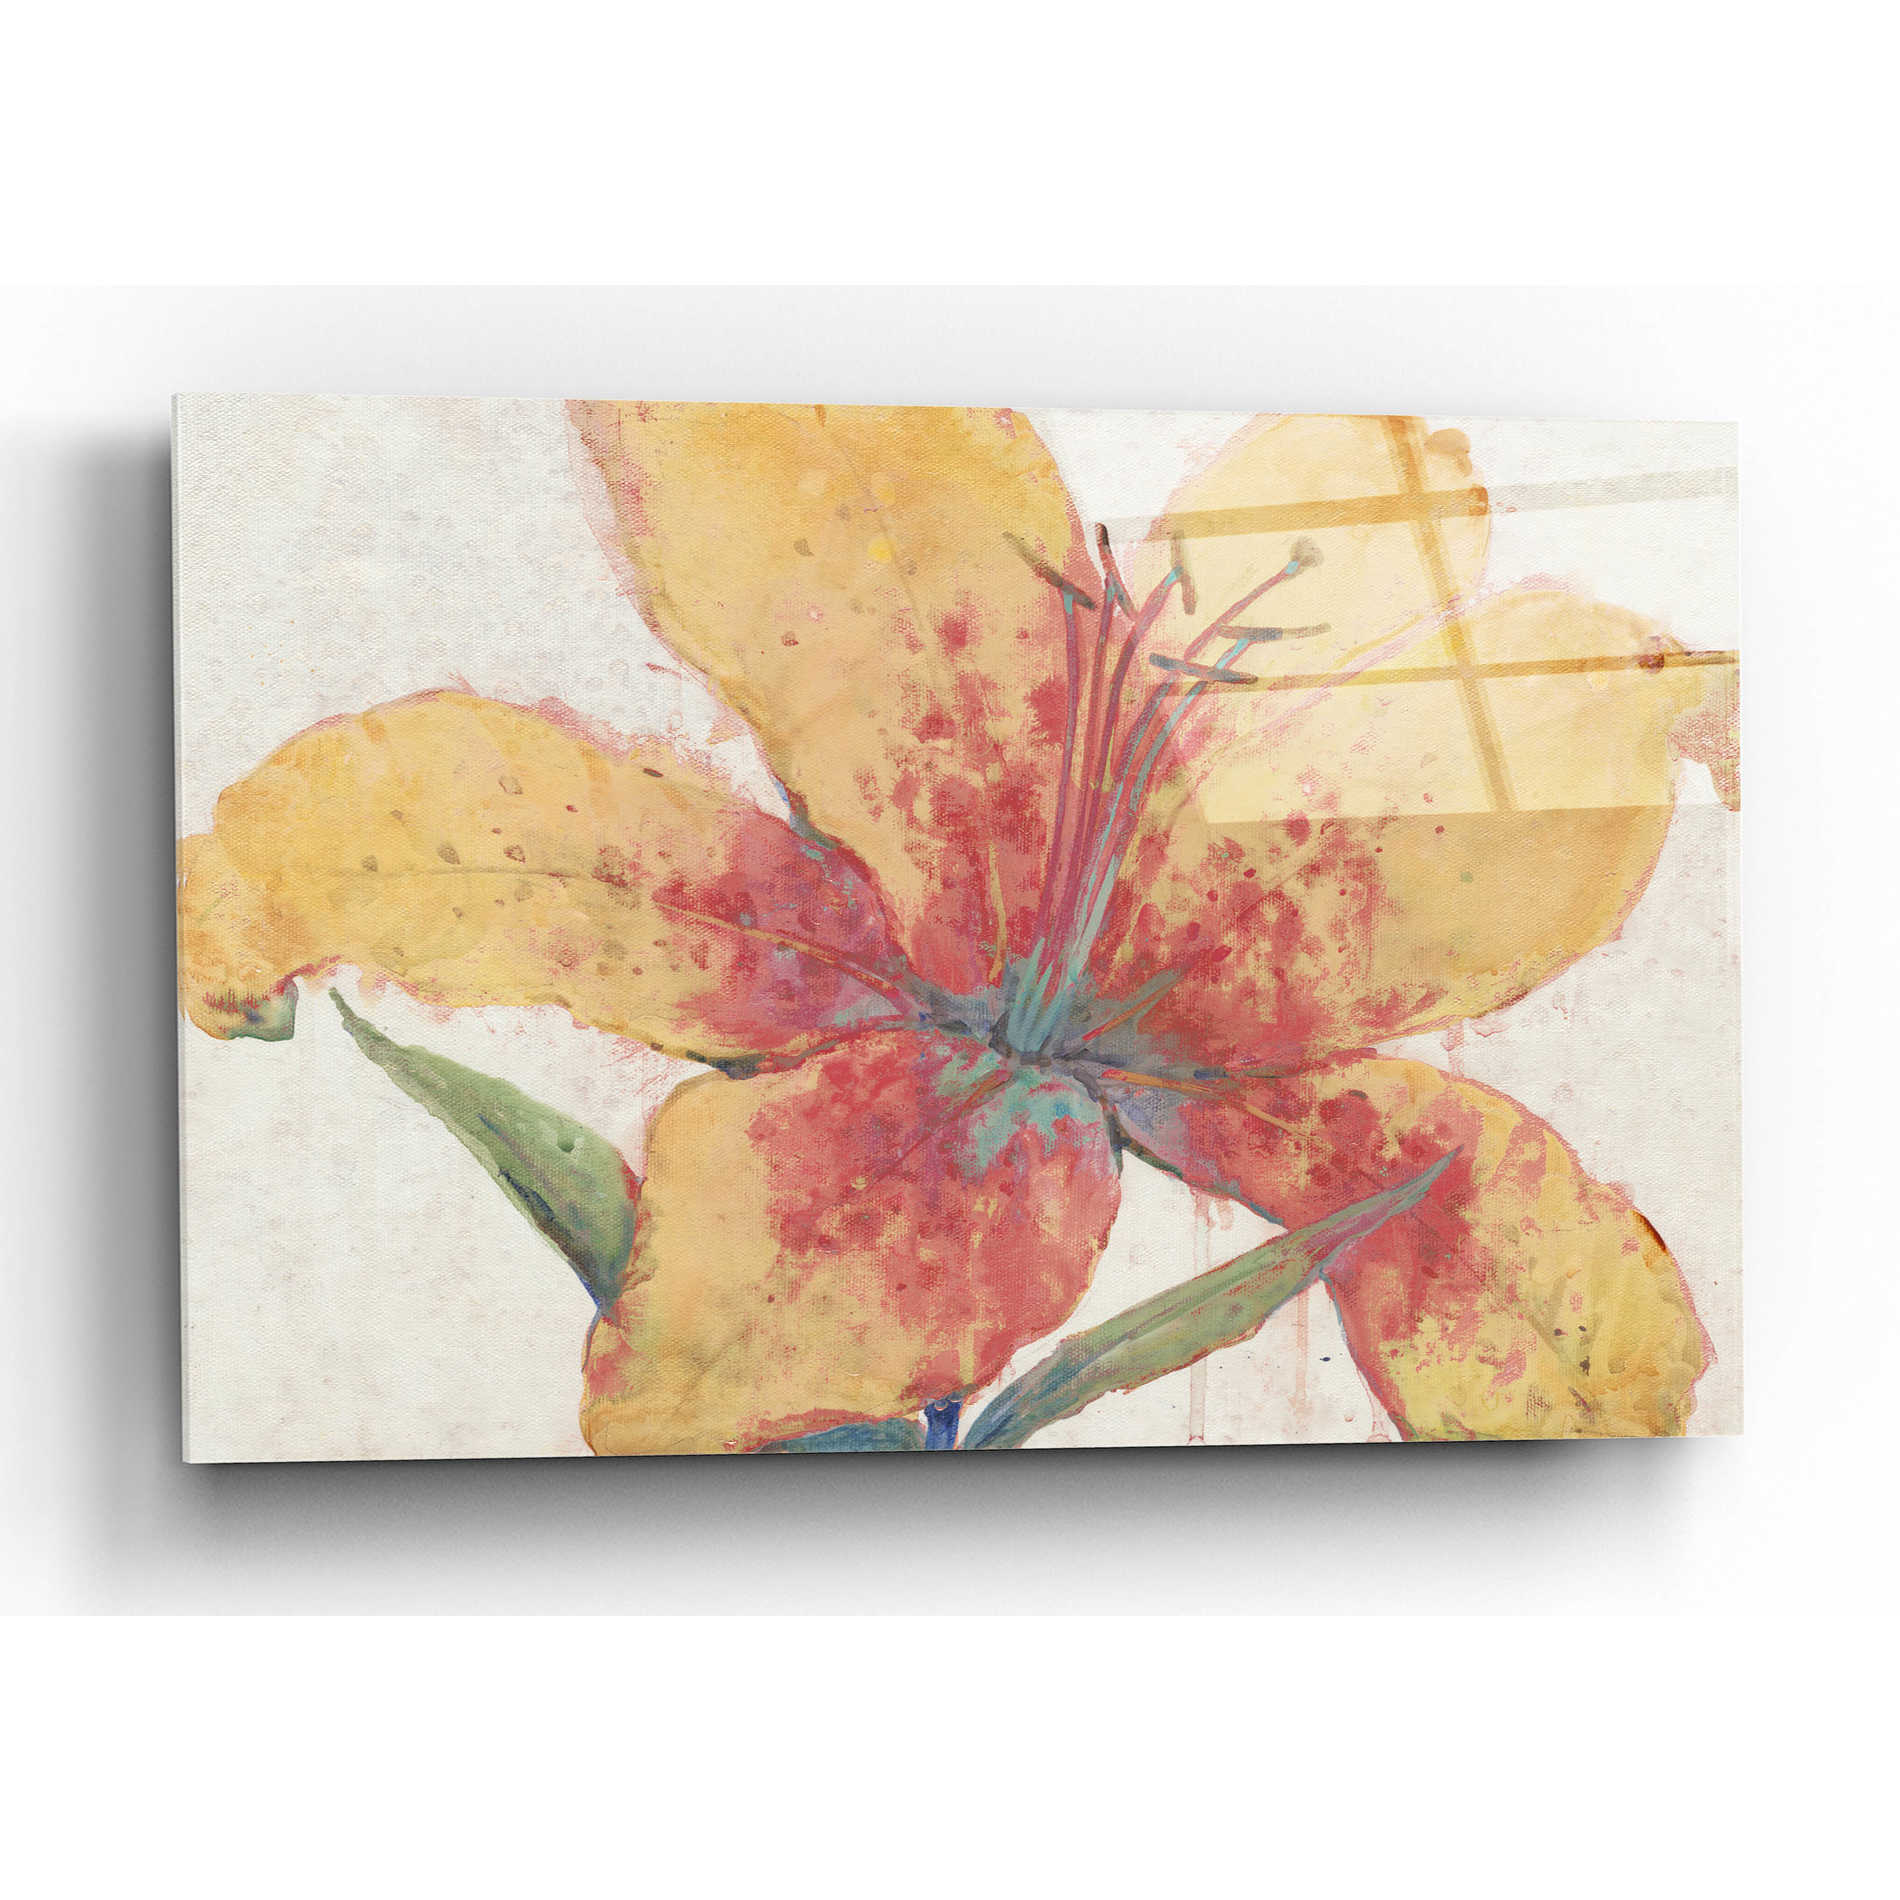 Epic Art 'Blooming Lily' by Tim O'Toole, Acrylic Glass Wall Art,24x16